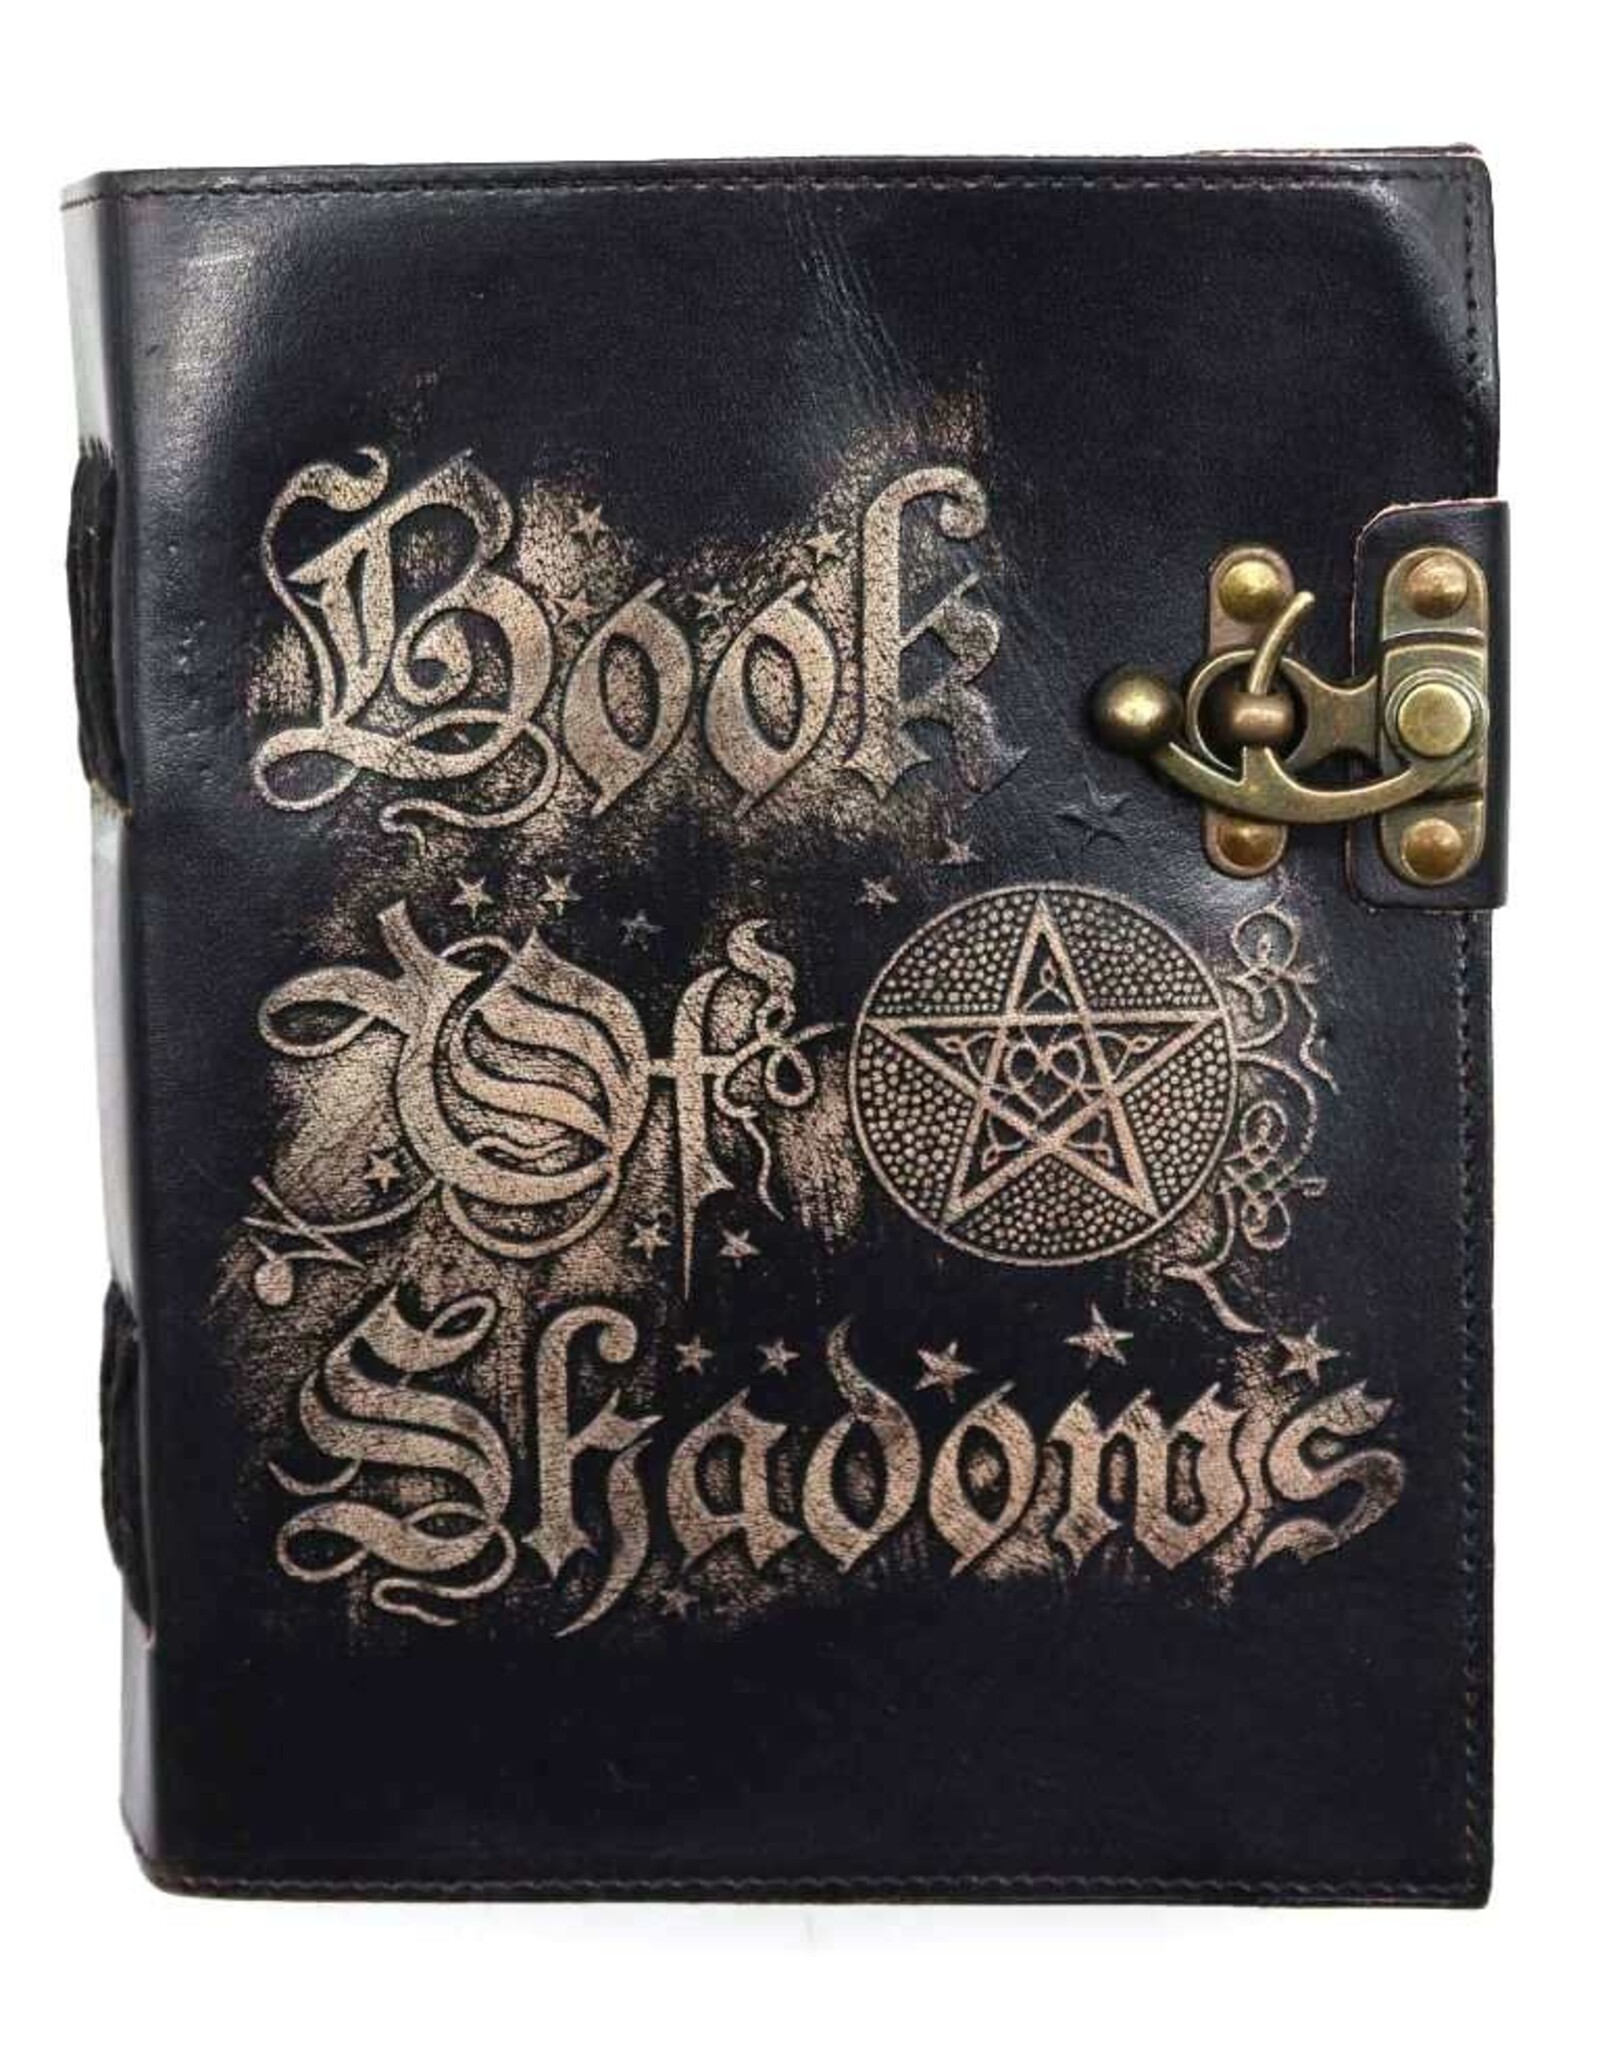 AWG Miscellaneous - Leather Deckle-edge Notebook 'Book of Shadows' 21x15cm